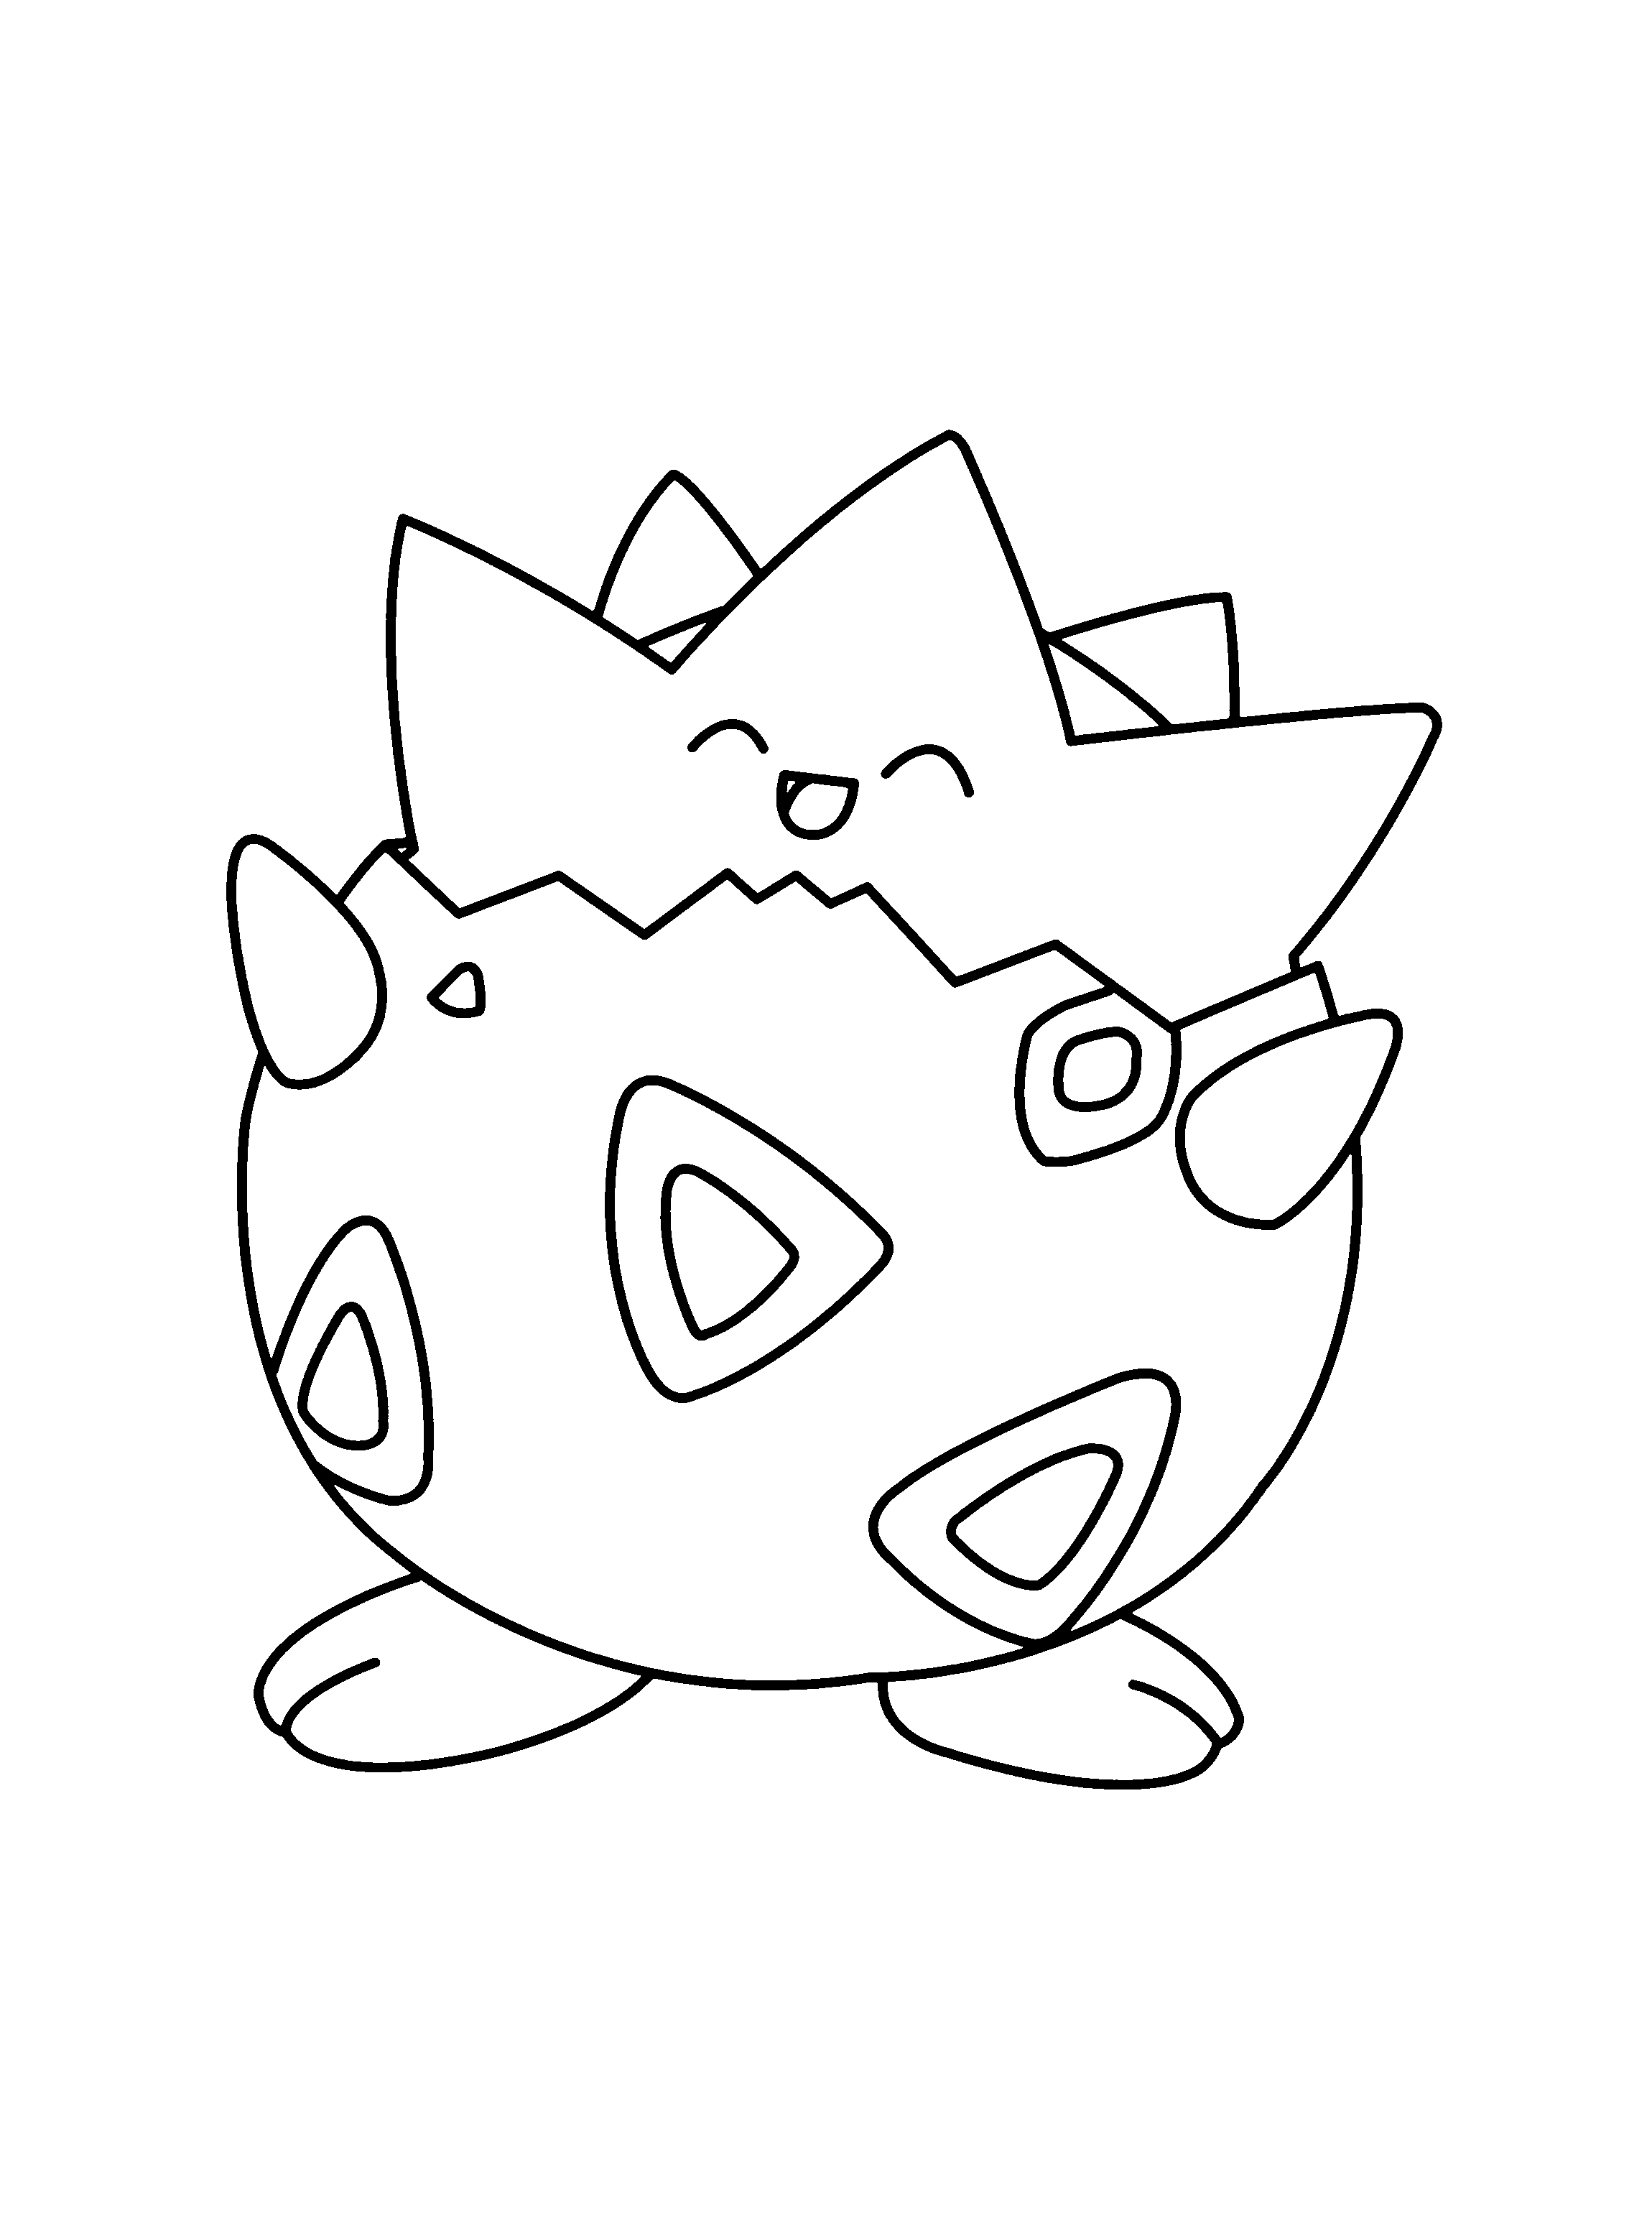 animated-coloring-pages-pokemon-image-0438